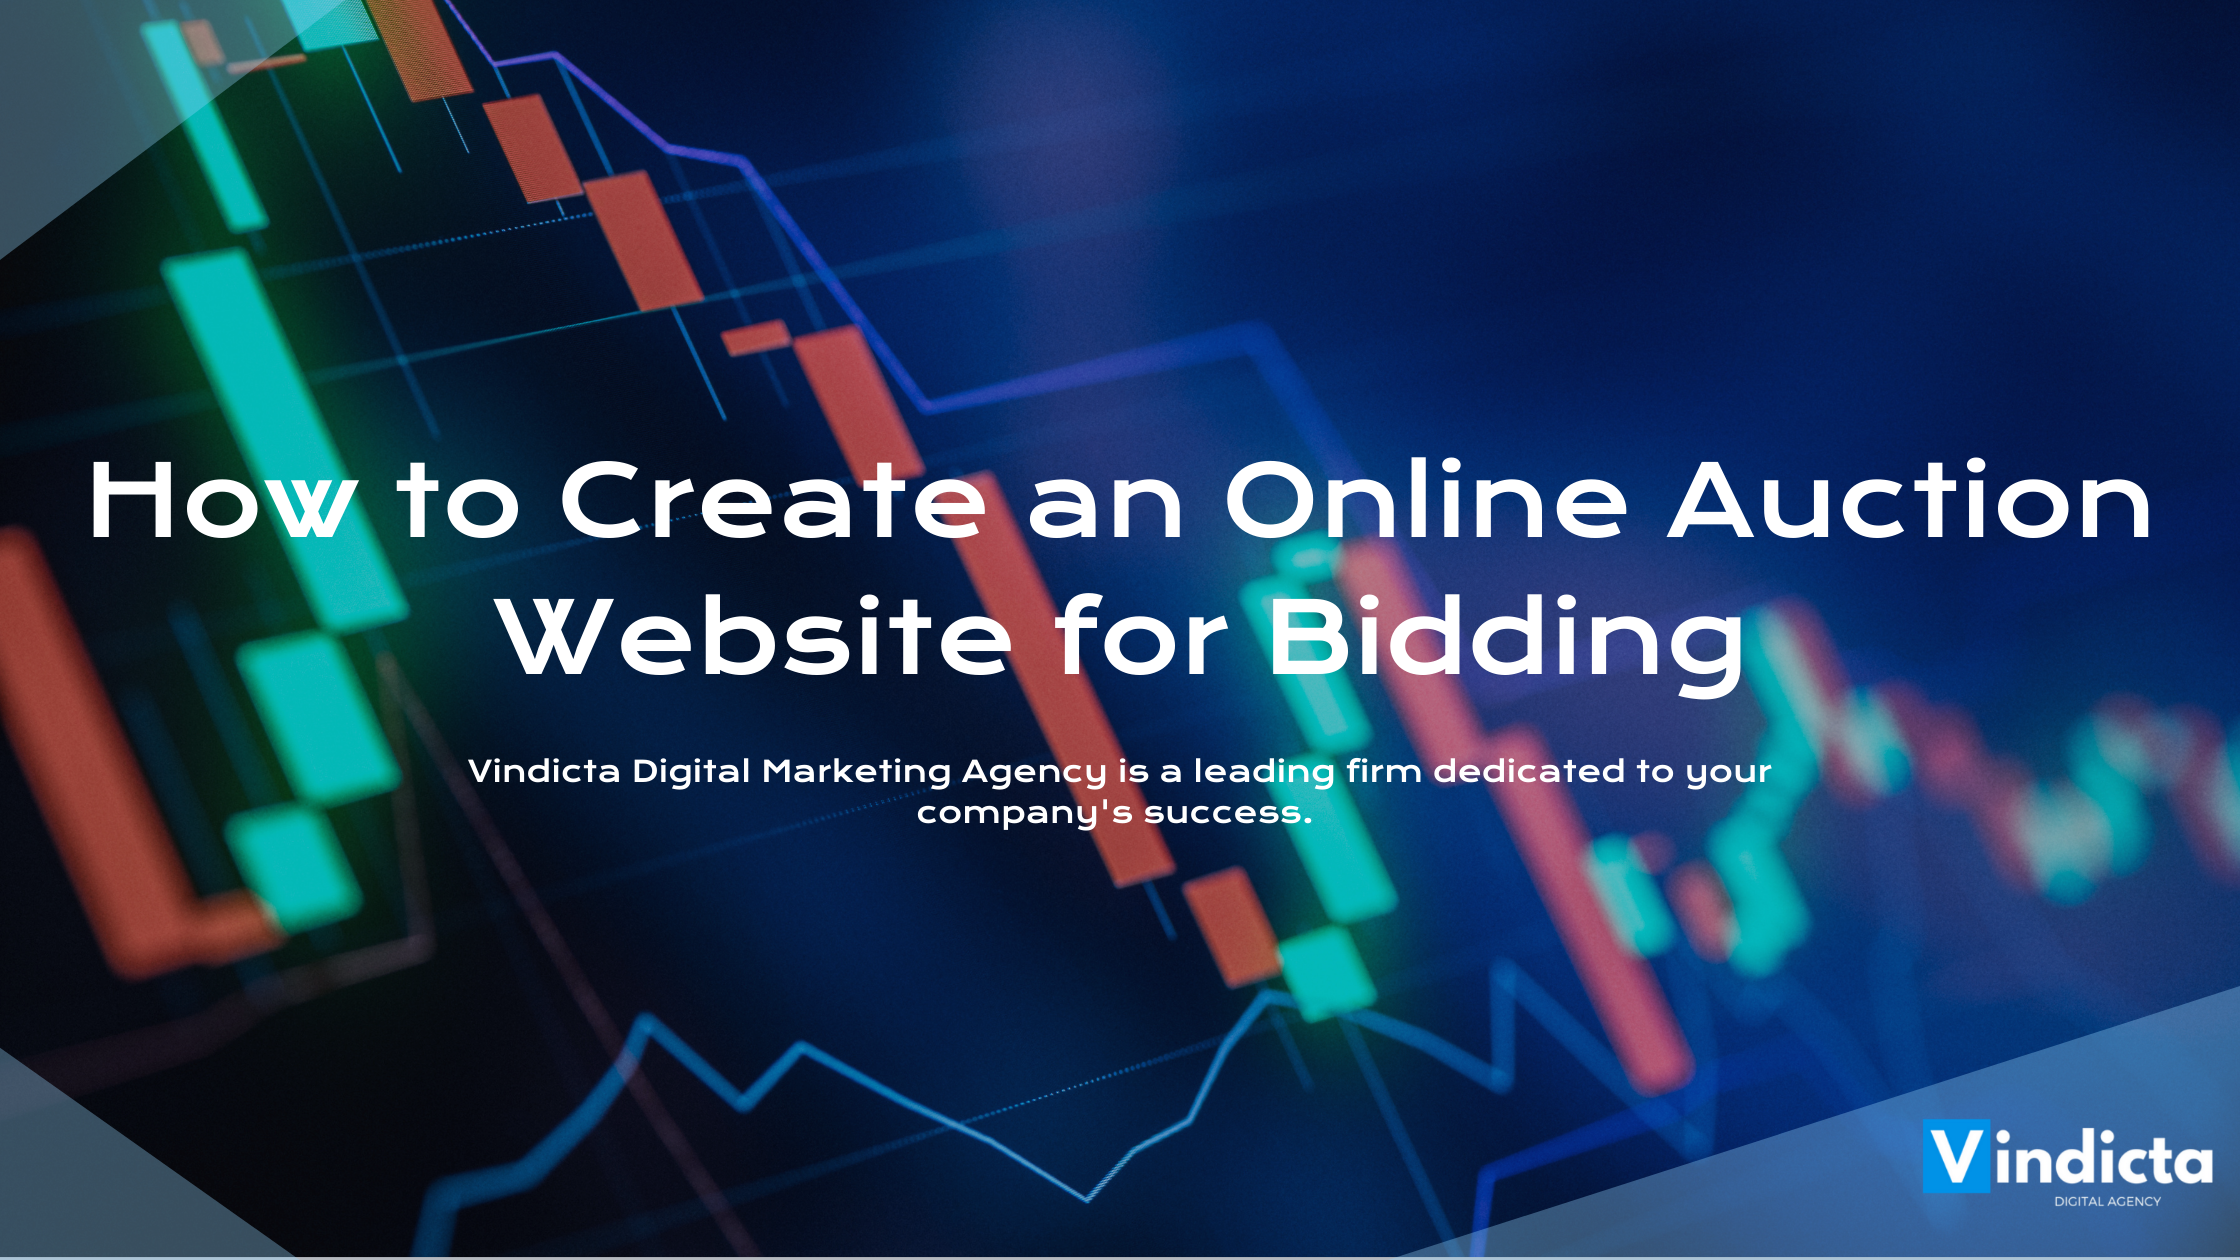 How to Create an Online Auction Website for Bidding